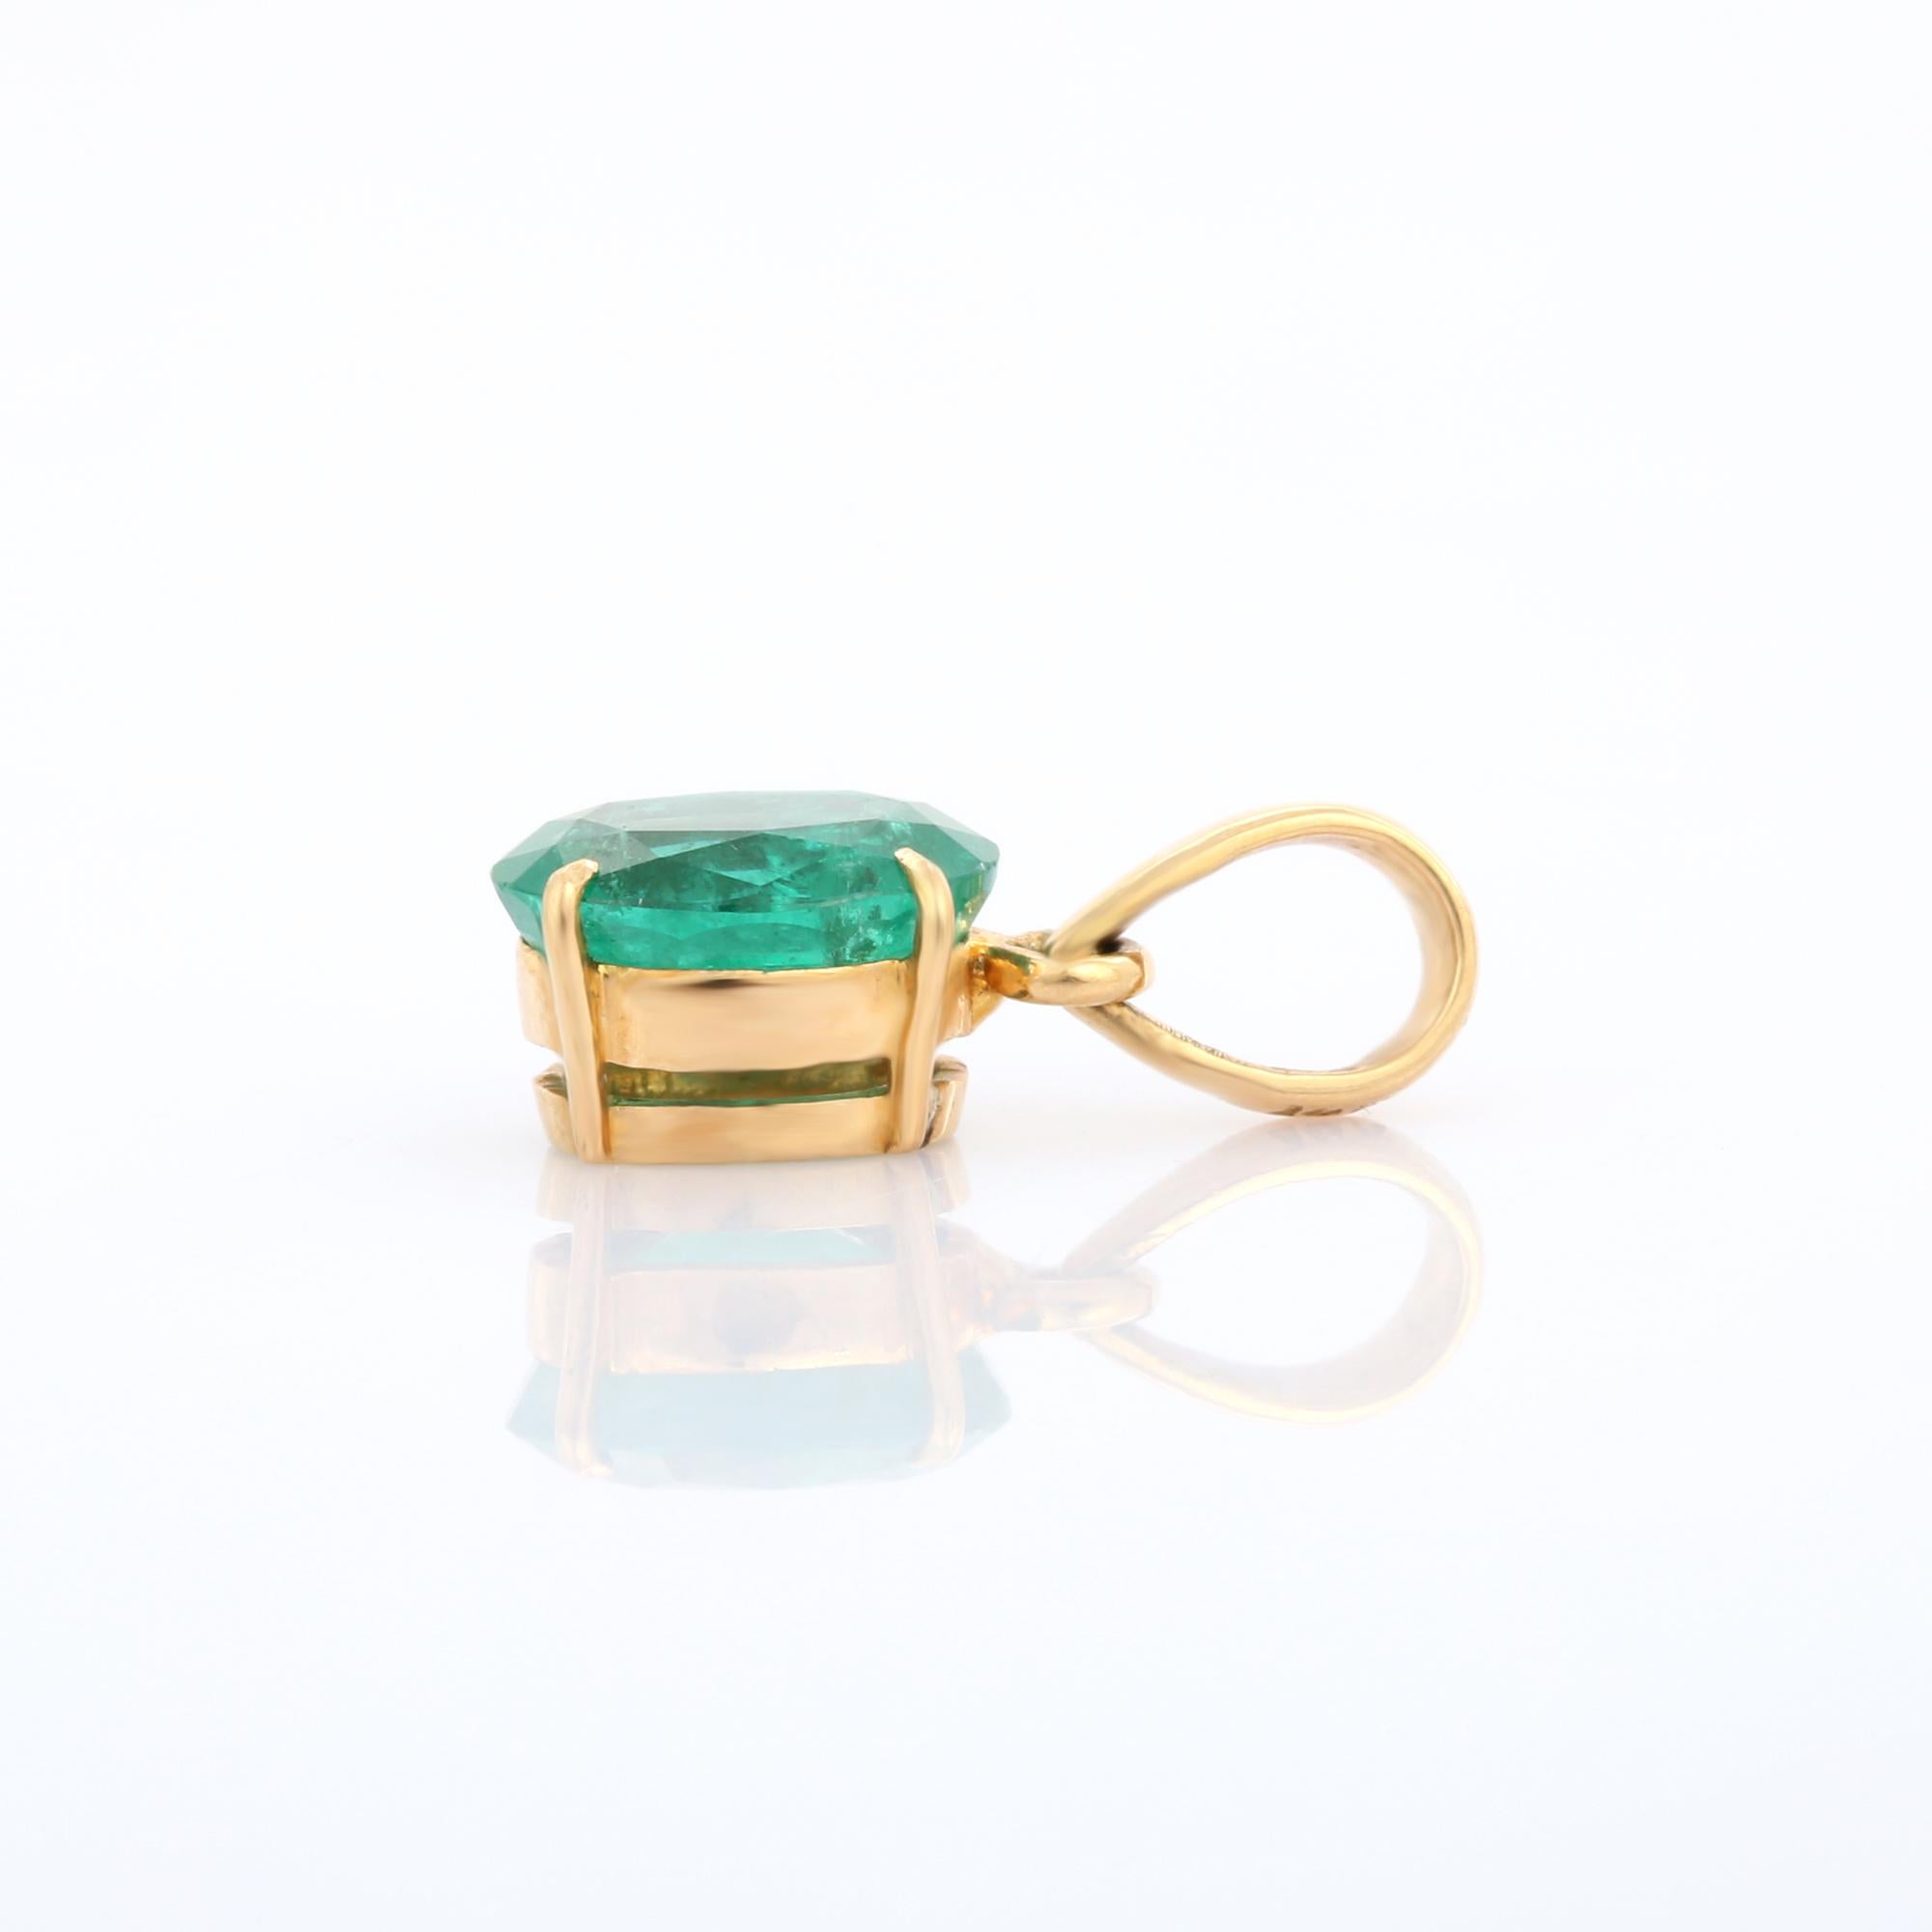 Natural Emerald pendant in 18K Gold. It has a oval cut emerald studded with diamonds that completes your look with a decent touch. Pendants are used to wear or gifted to represent love and promises. It's an attractive jewelry piece that goes with